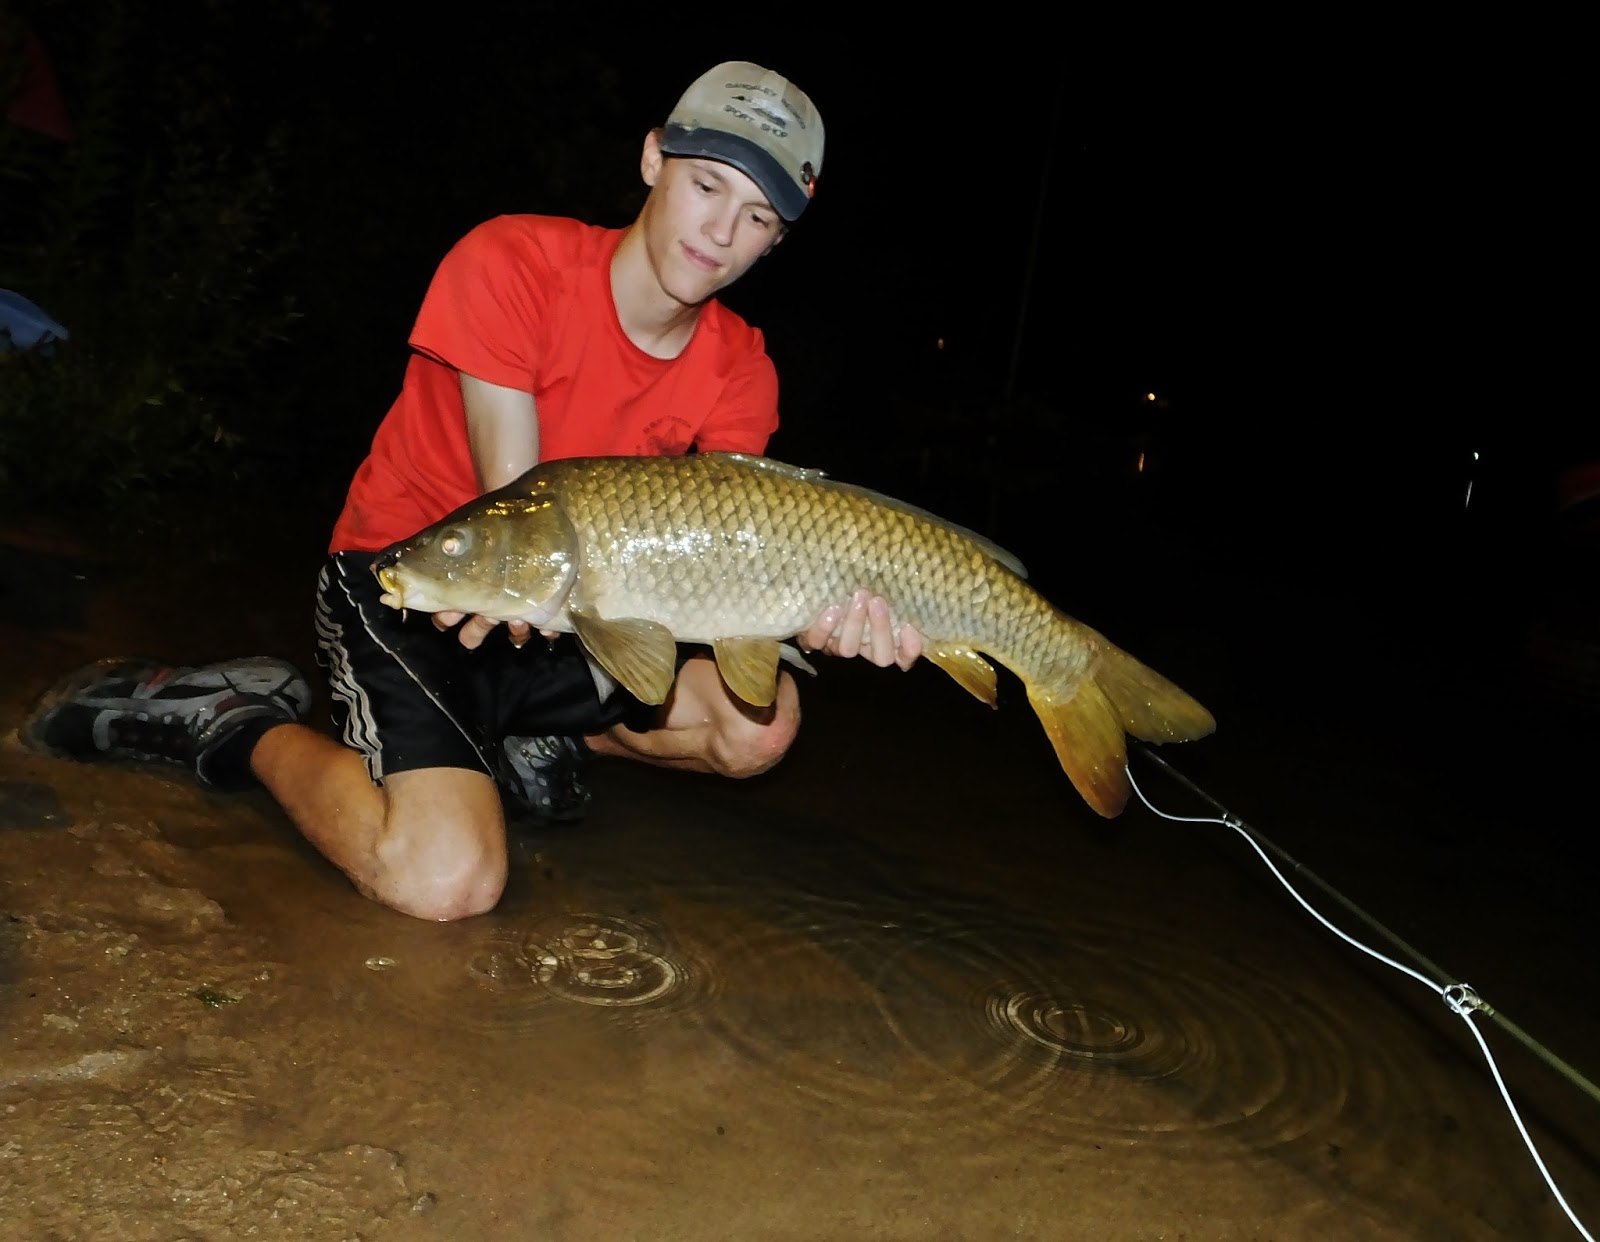 Connecticut Fly Angler: Night Fishing for Carp With a Fly